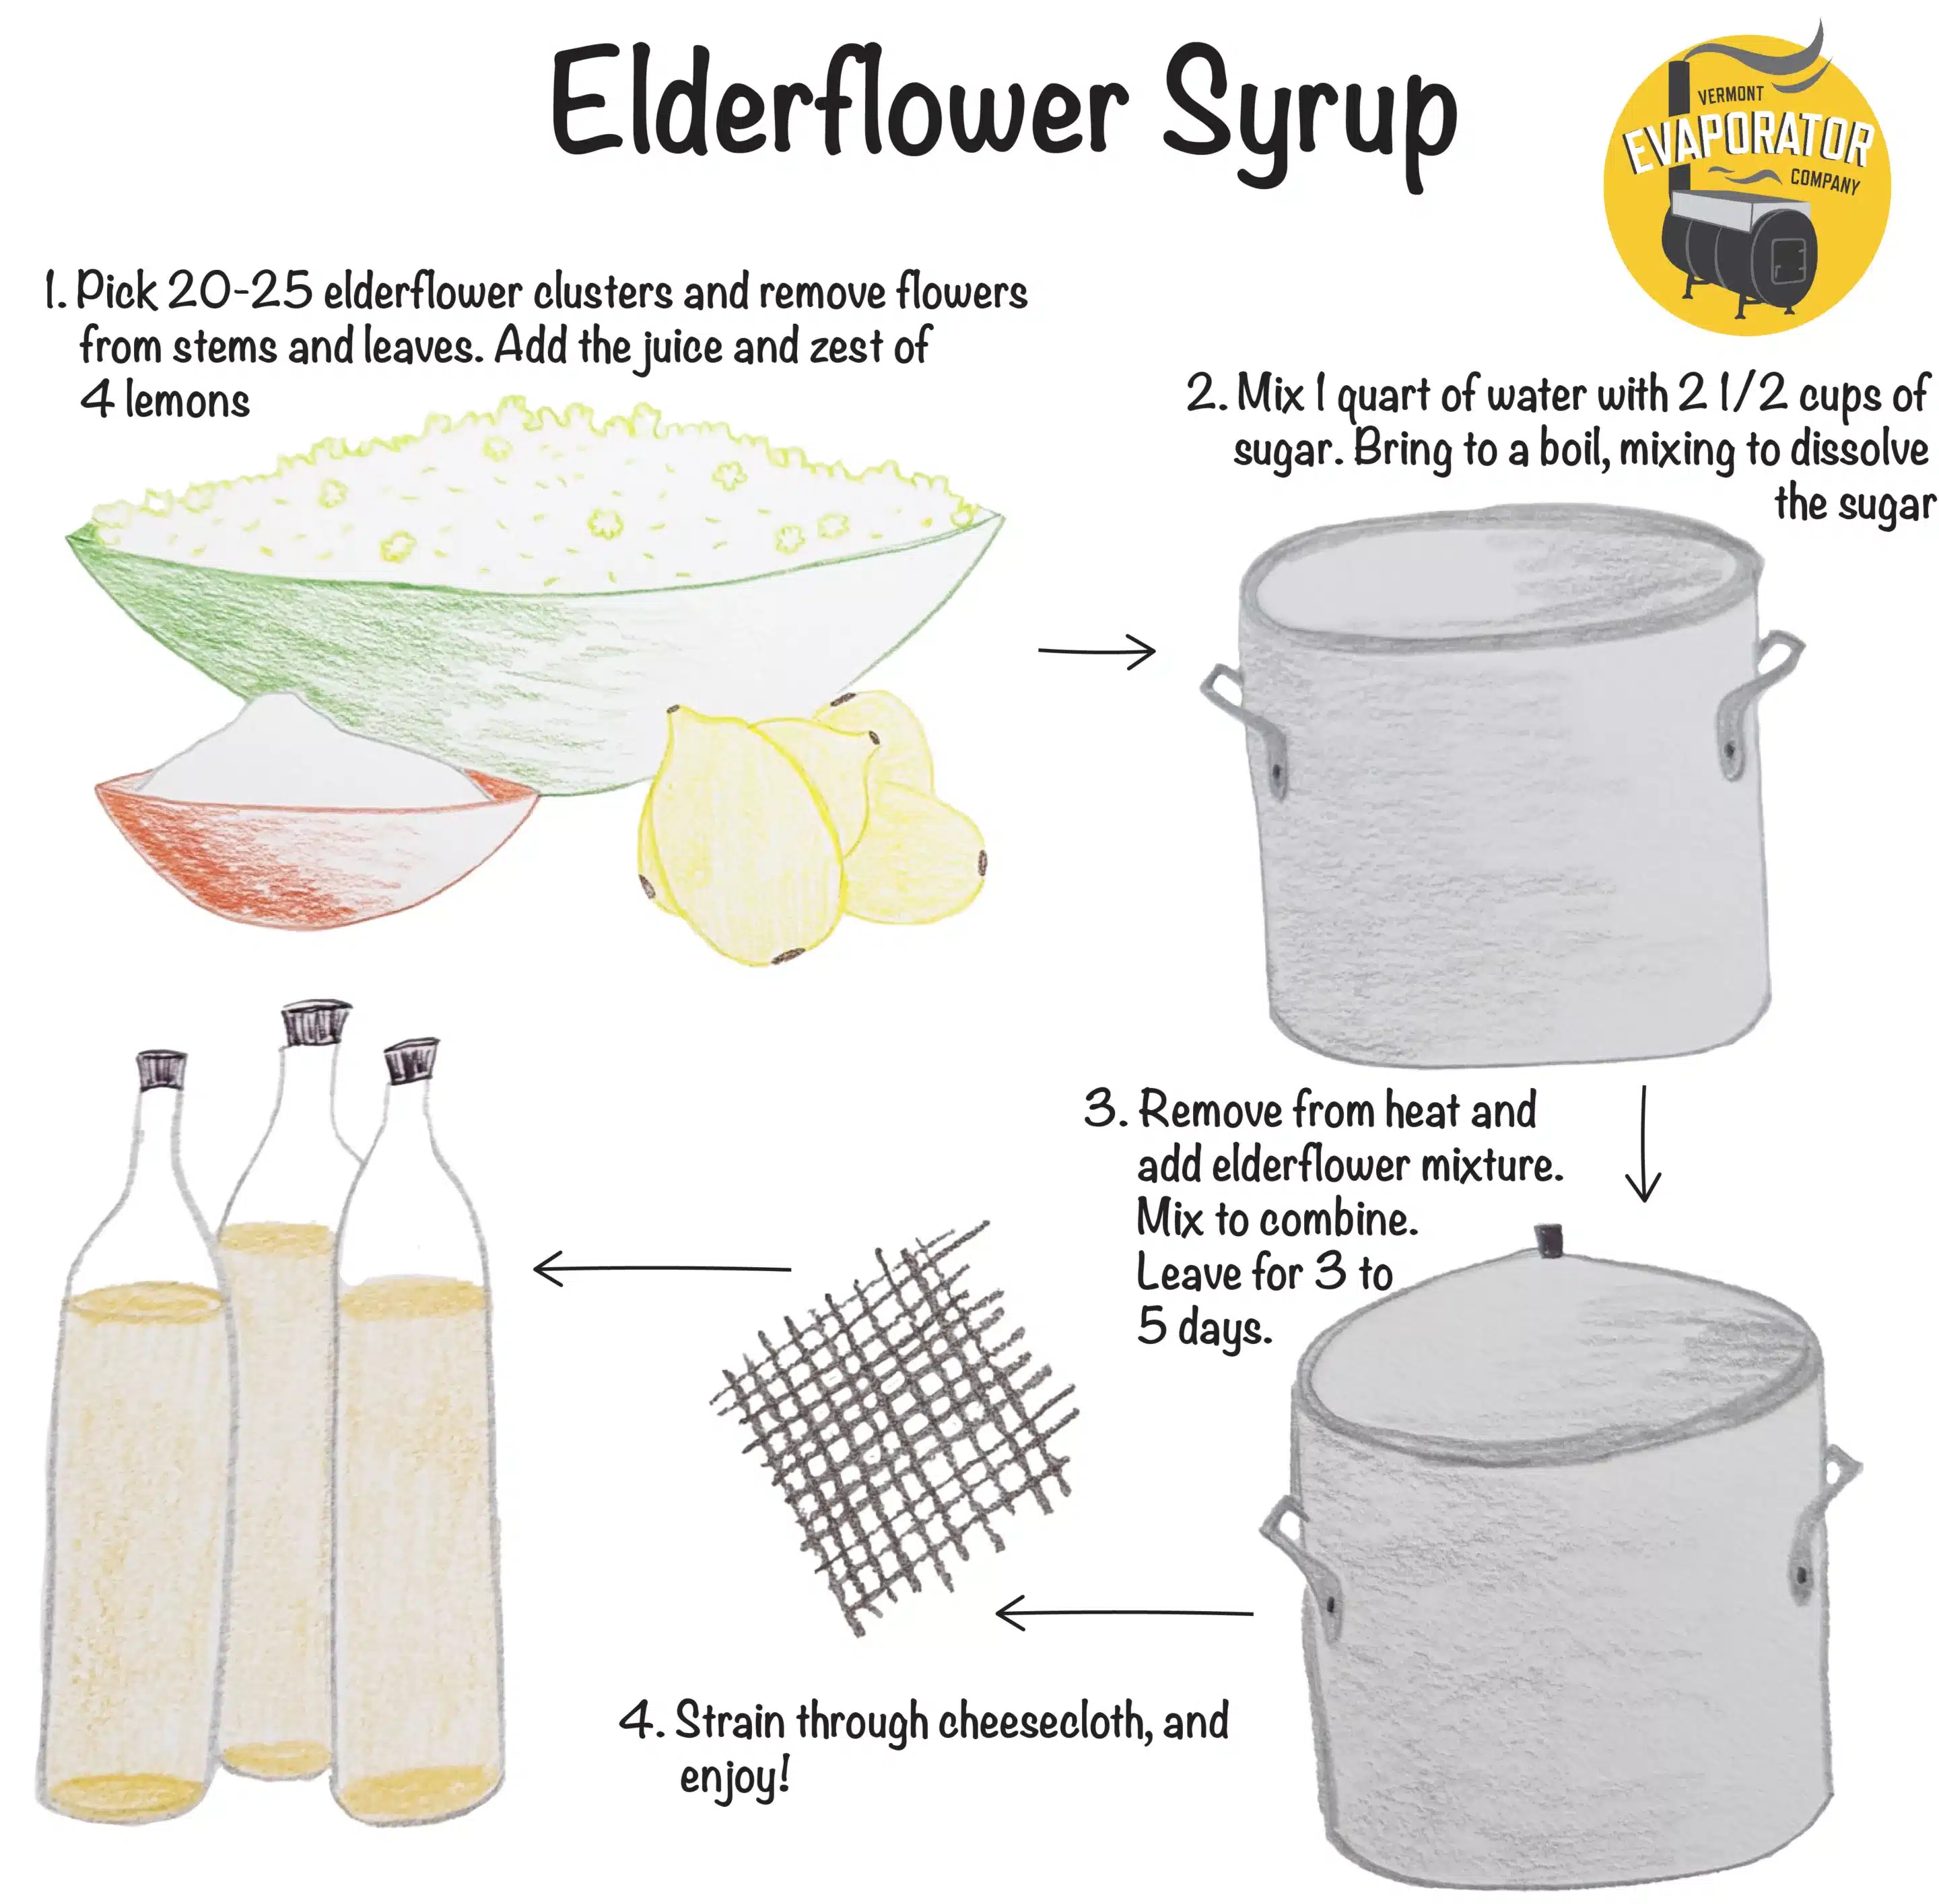 A hand drawn infographic about how to make elderflower syrup.